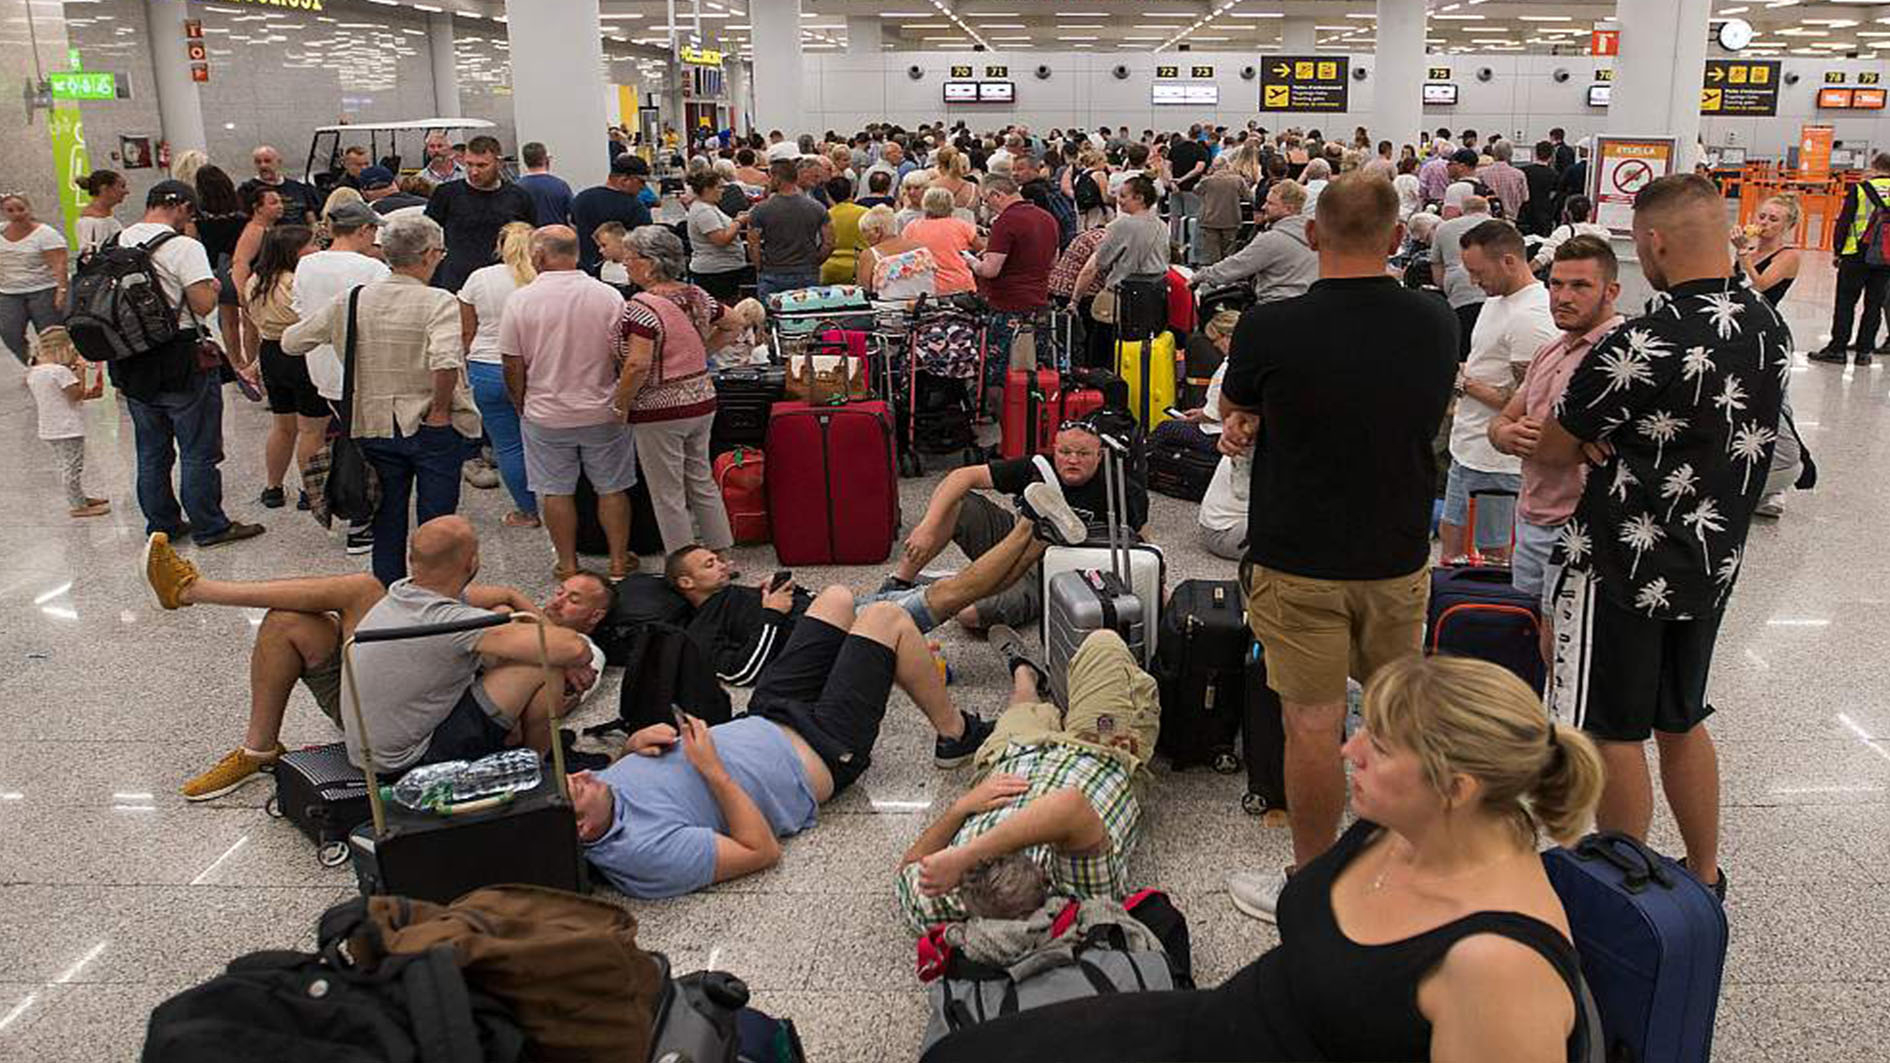 Hundreds Of Thousands Stranded After Travel Firm Thomas Cook Collapse Cgtn